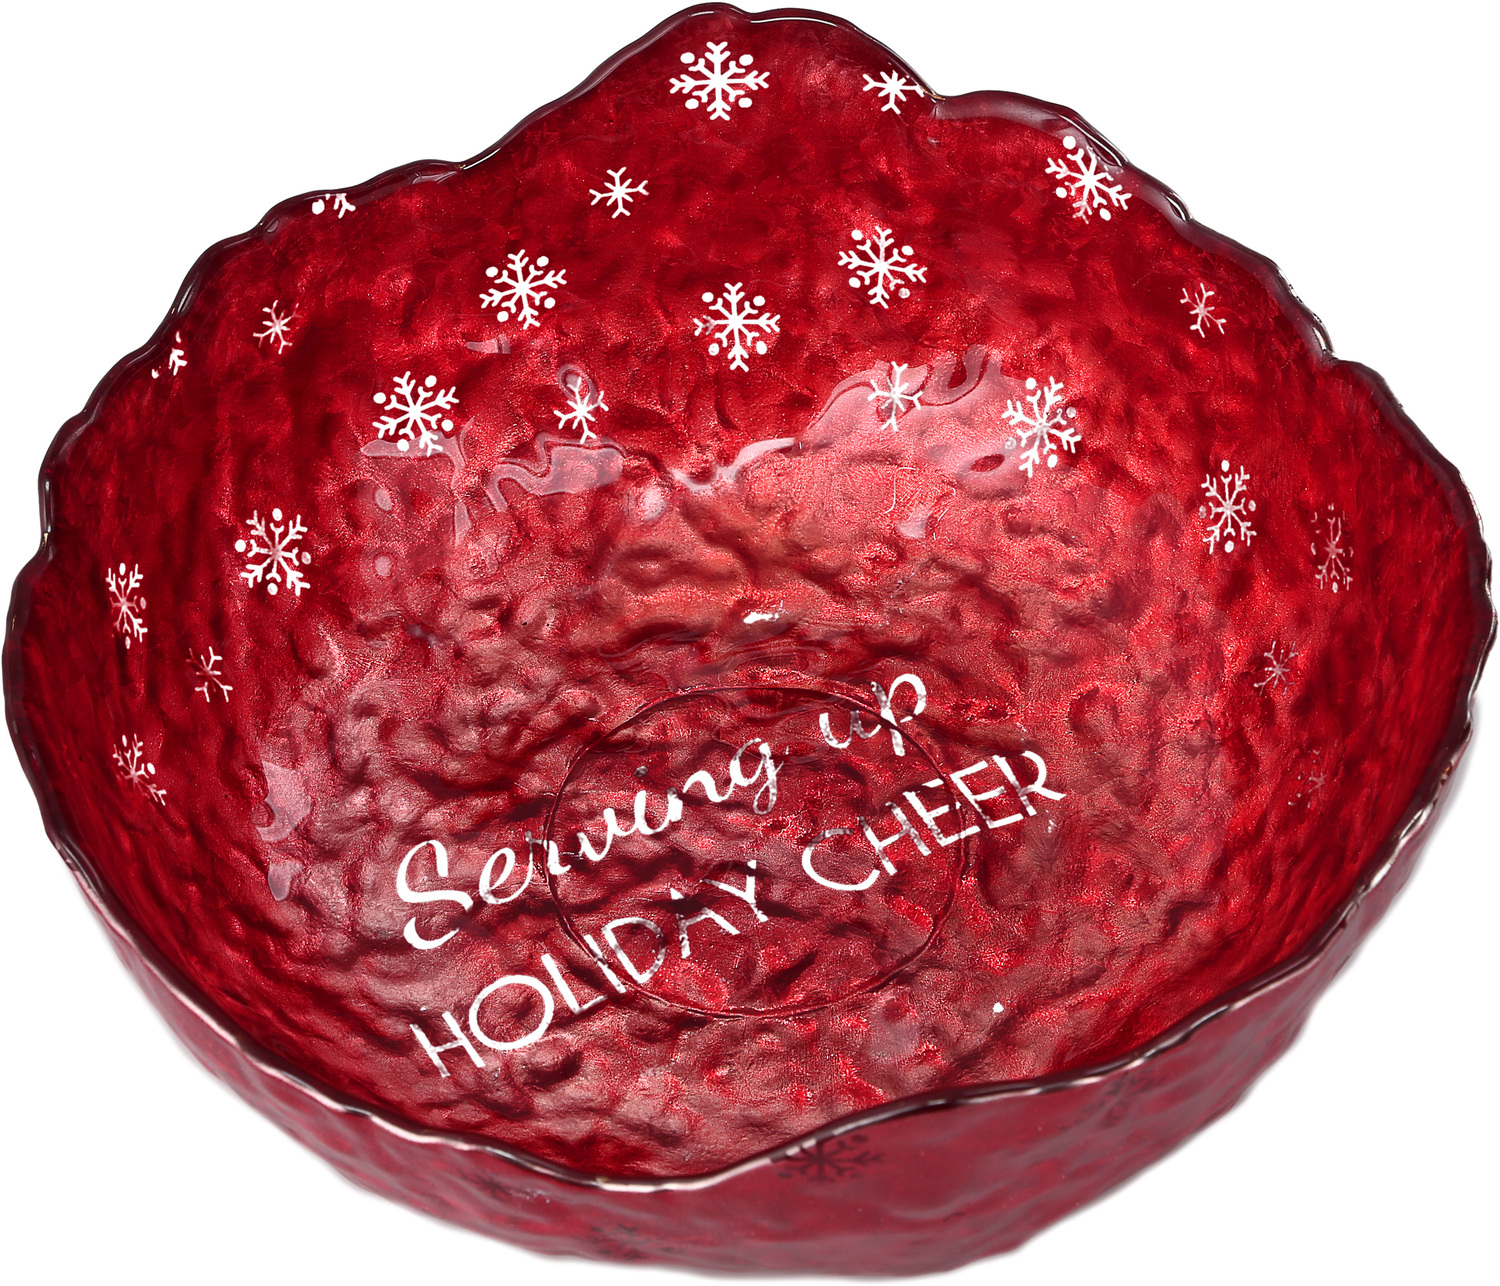 Holiday Cheer by Hostess with the Mostess - Holiday Cheer - 9.5" Glass Serving Bowl